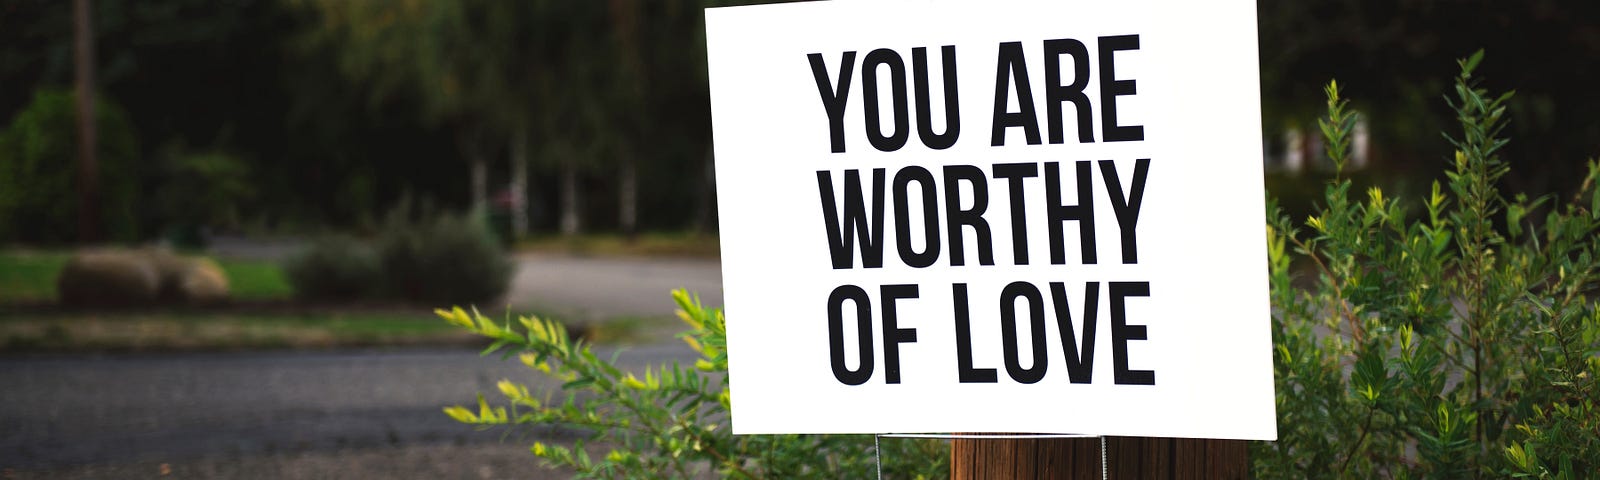 A signpost that says “You are worthy of love”.